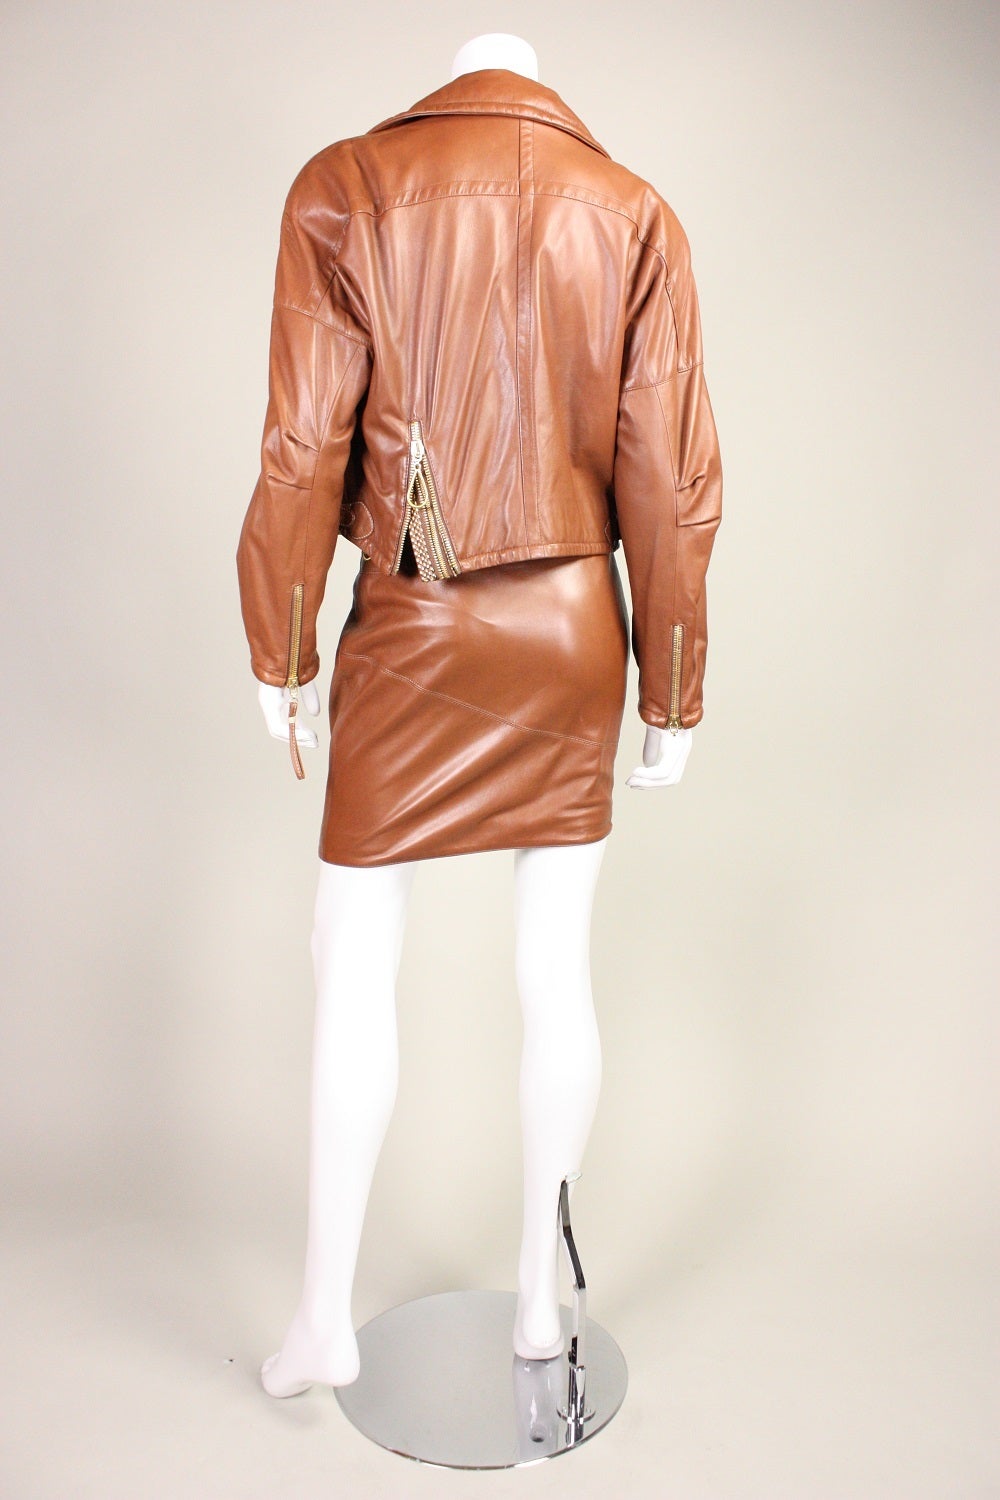 Gianfranco Ferre Leather Suit with Hardware Detail In Excellent Condition For Sale In Los Angeles, CA